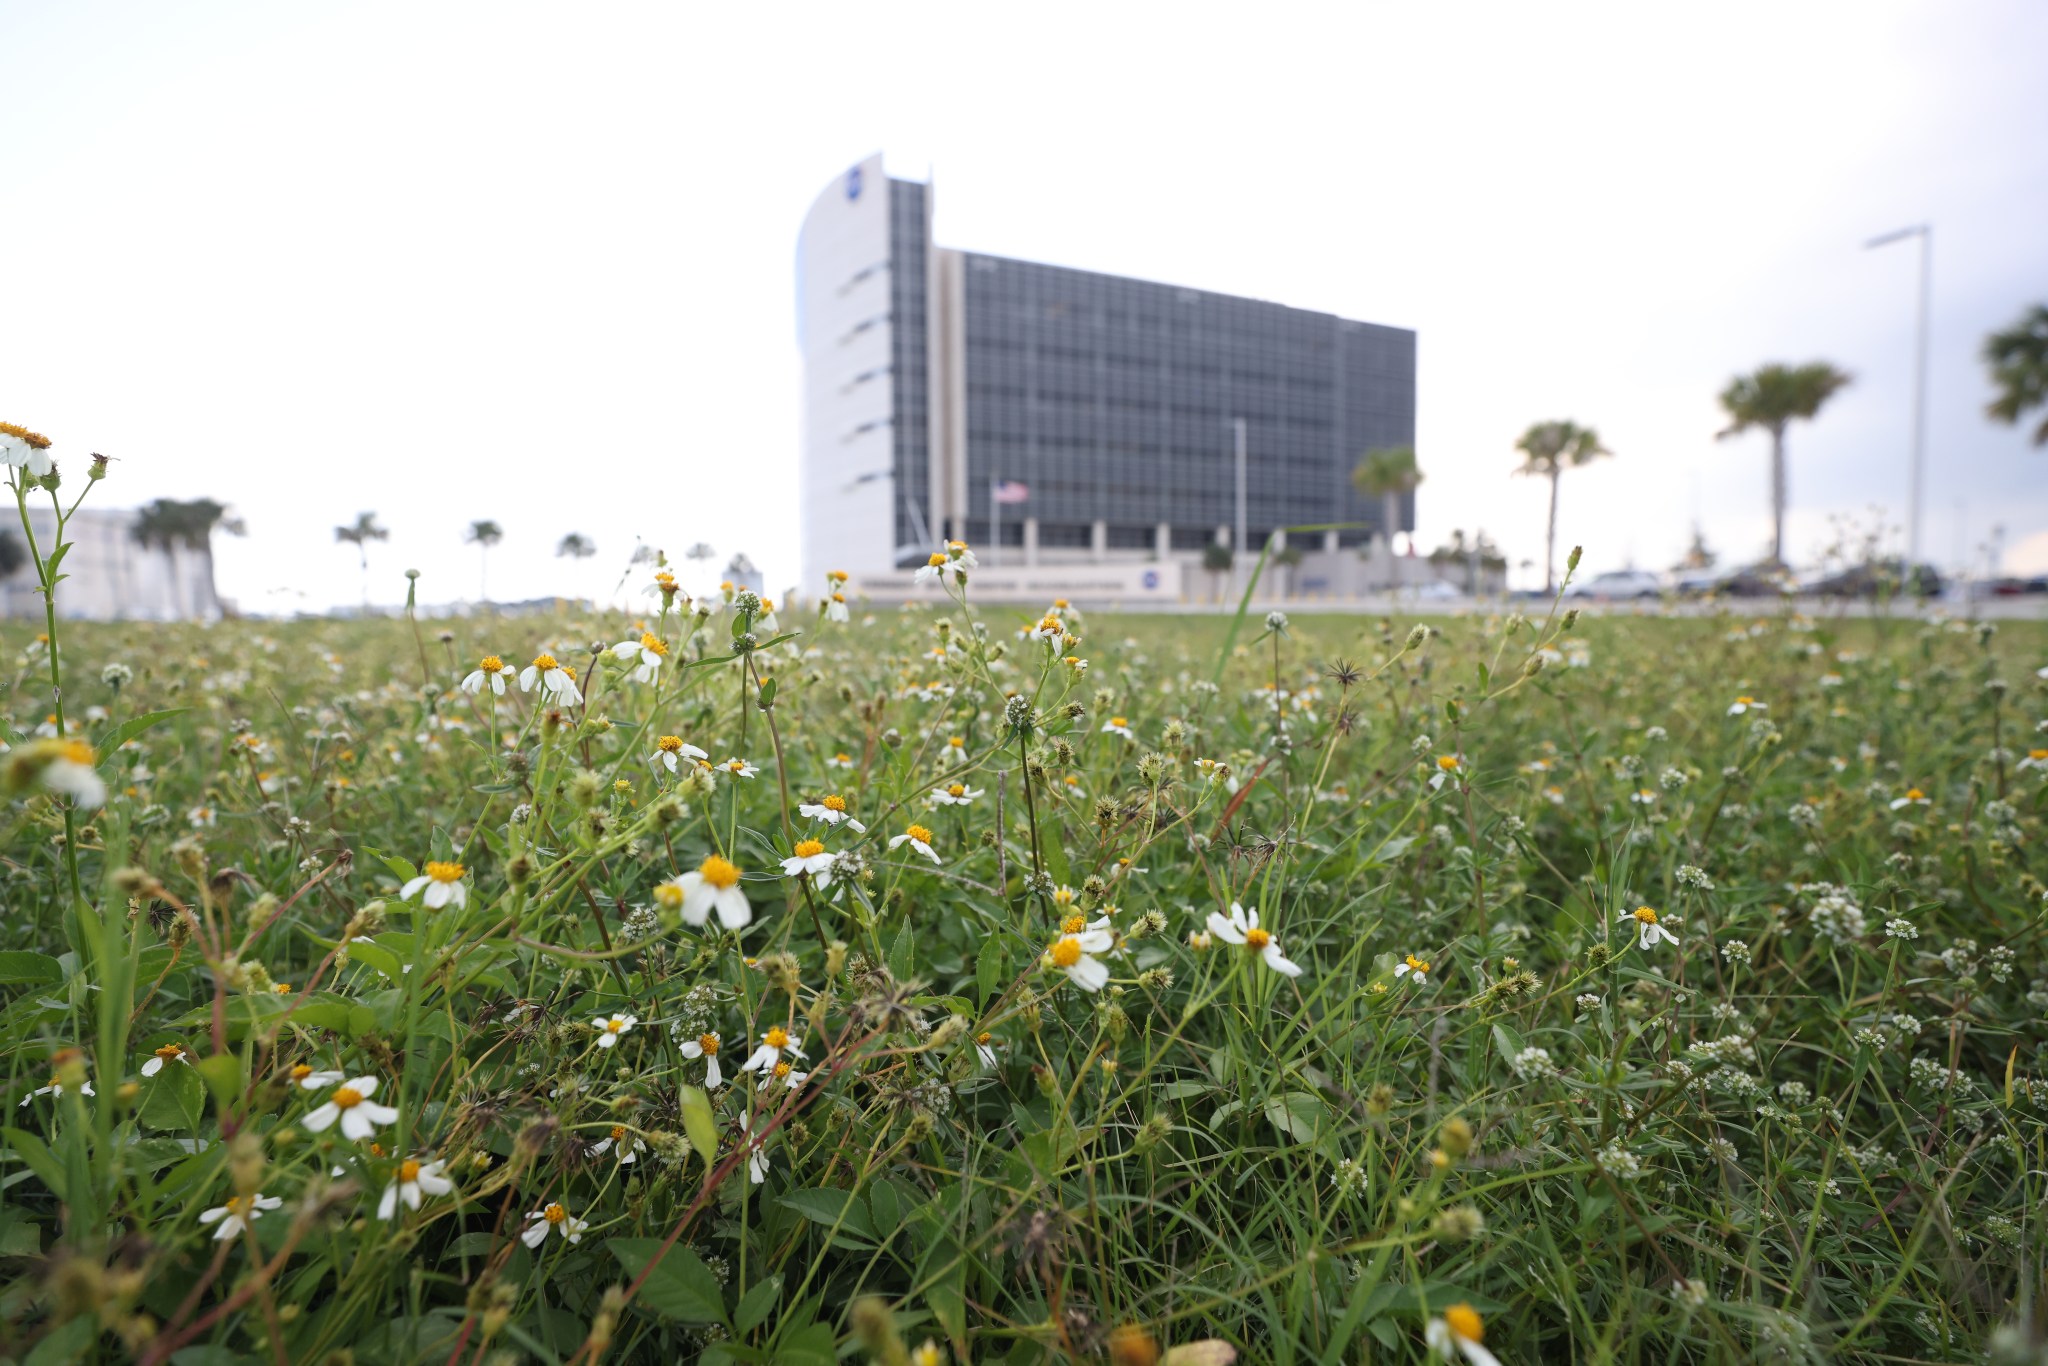 Wildflowers are in view near the Central Campus Headquarters building at NASA’s Kennedy Space Center in Florida.